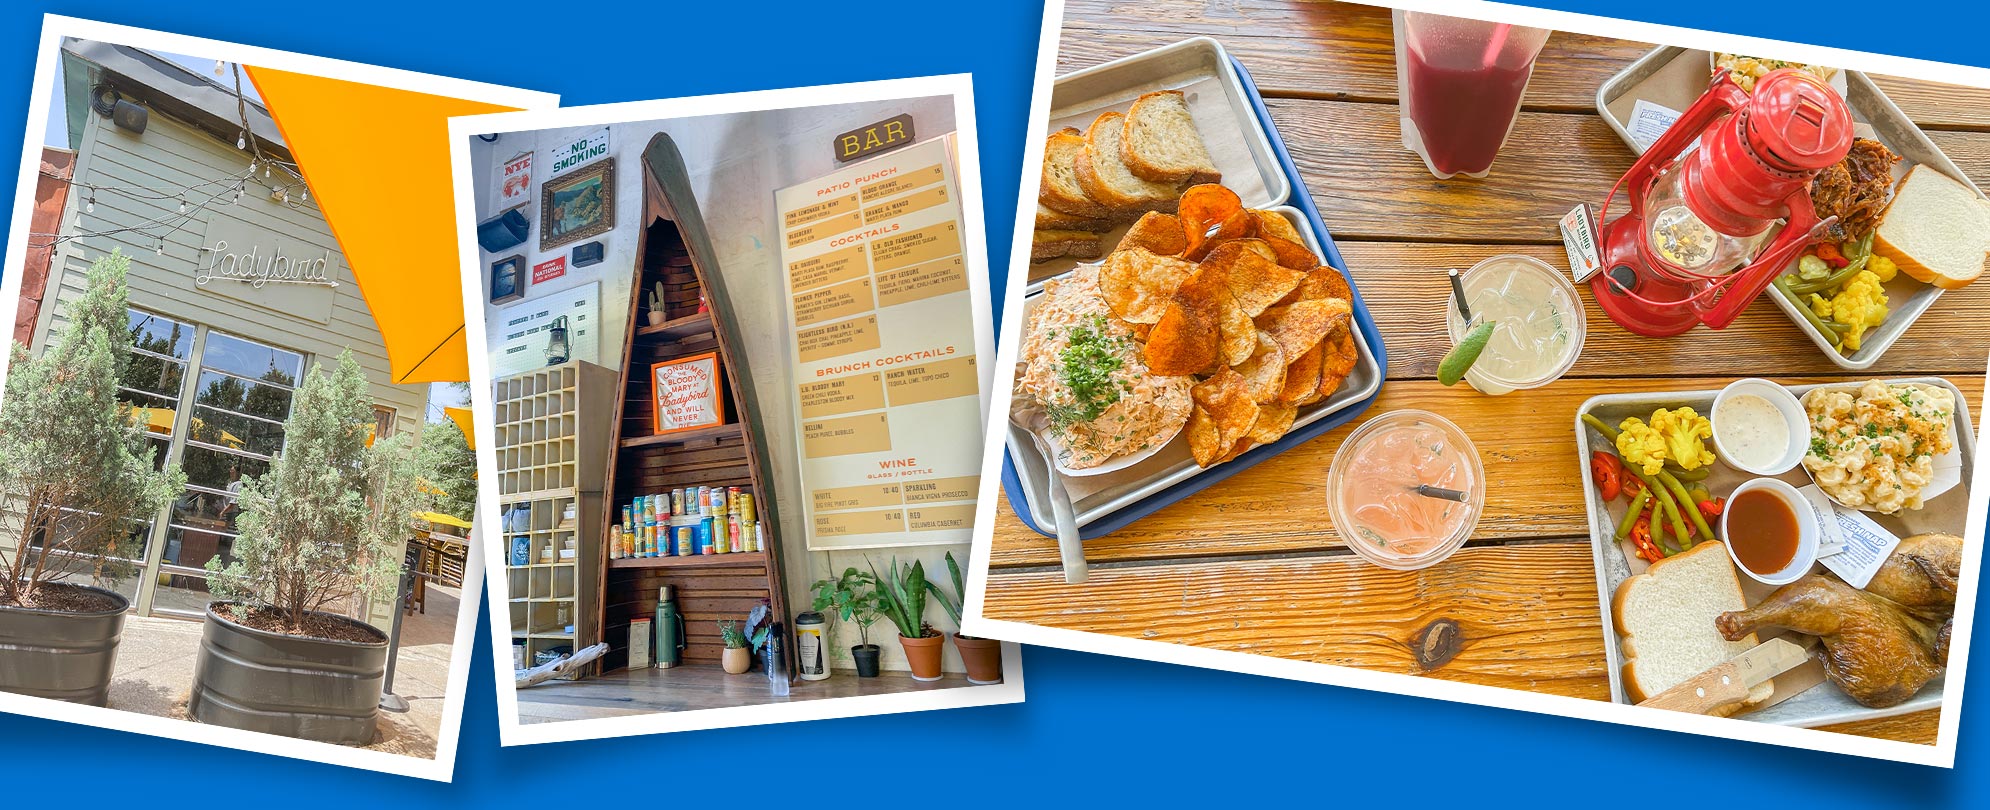 Three snapshots on a blue background showing an outside patio area at Ladybird Grove & Mess Hall, a half canoe wall art feature next to a large wall menu, and a wooden table with a lantern and meal trays.